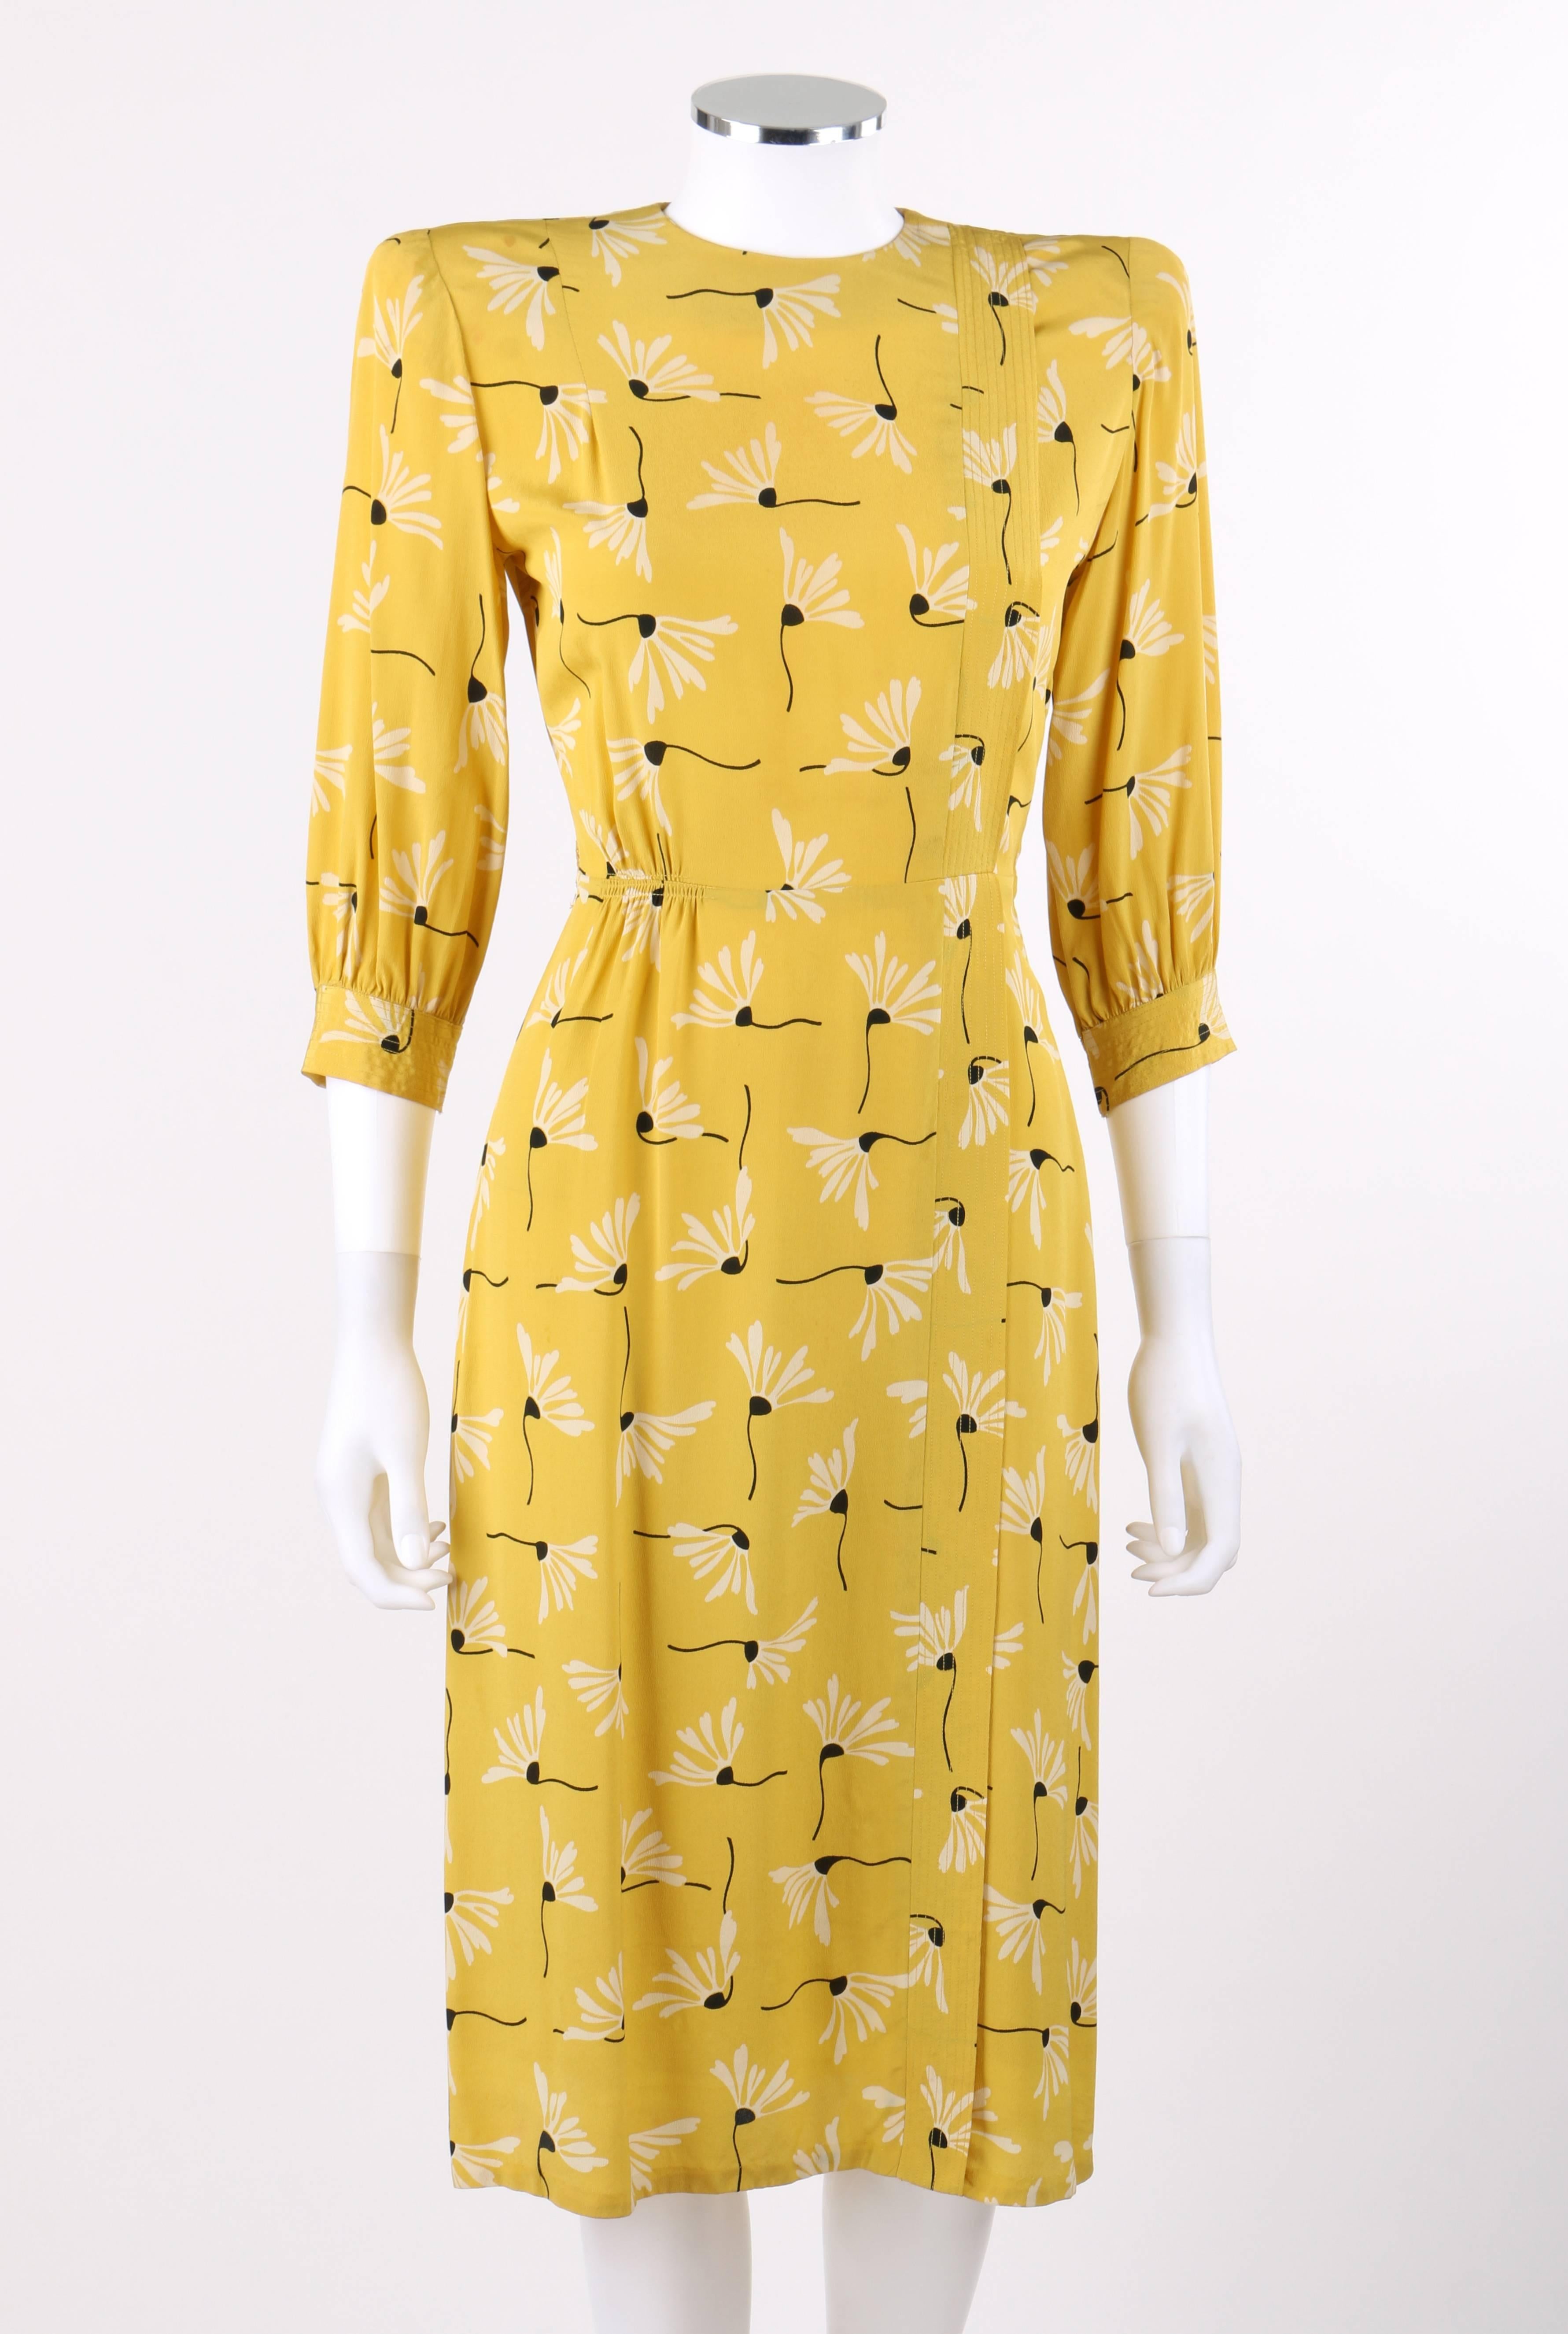 Vintage Sergee of California c.1940's yellow daisy print rayon crepe day dress. White and black all over daisy floral print on yellow rayon crepe. Crew neckline. 3/4 sleeves lightly gathered at cuff. Left front thin overlay from shoulder to hem with